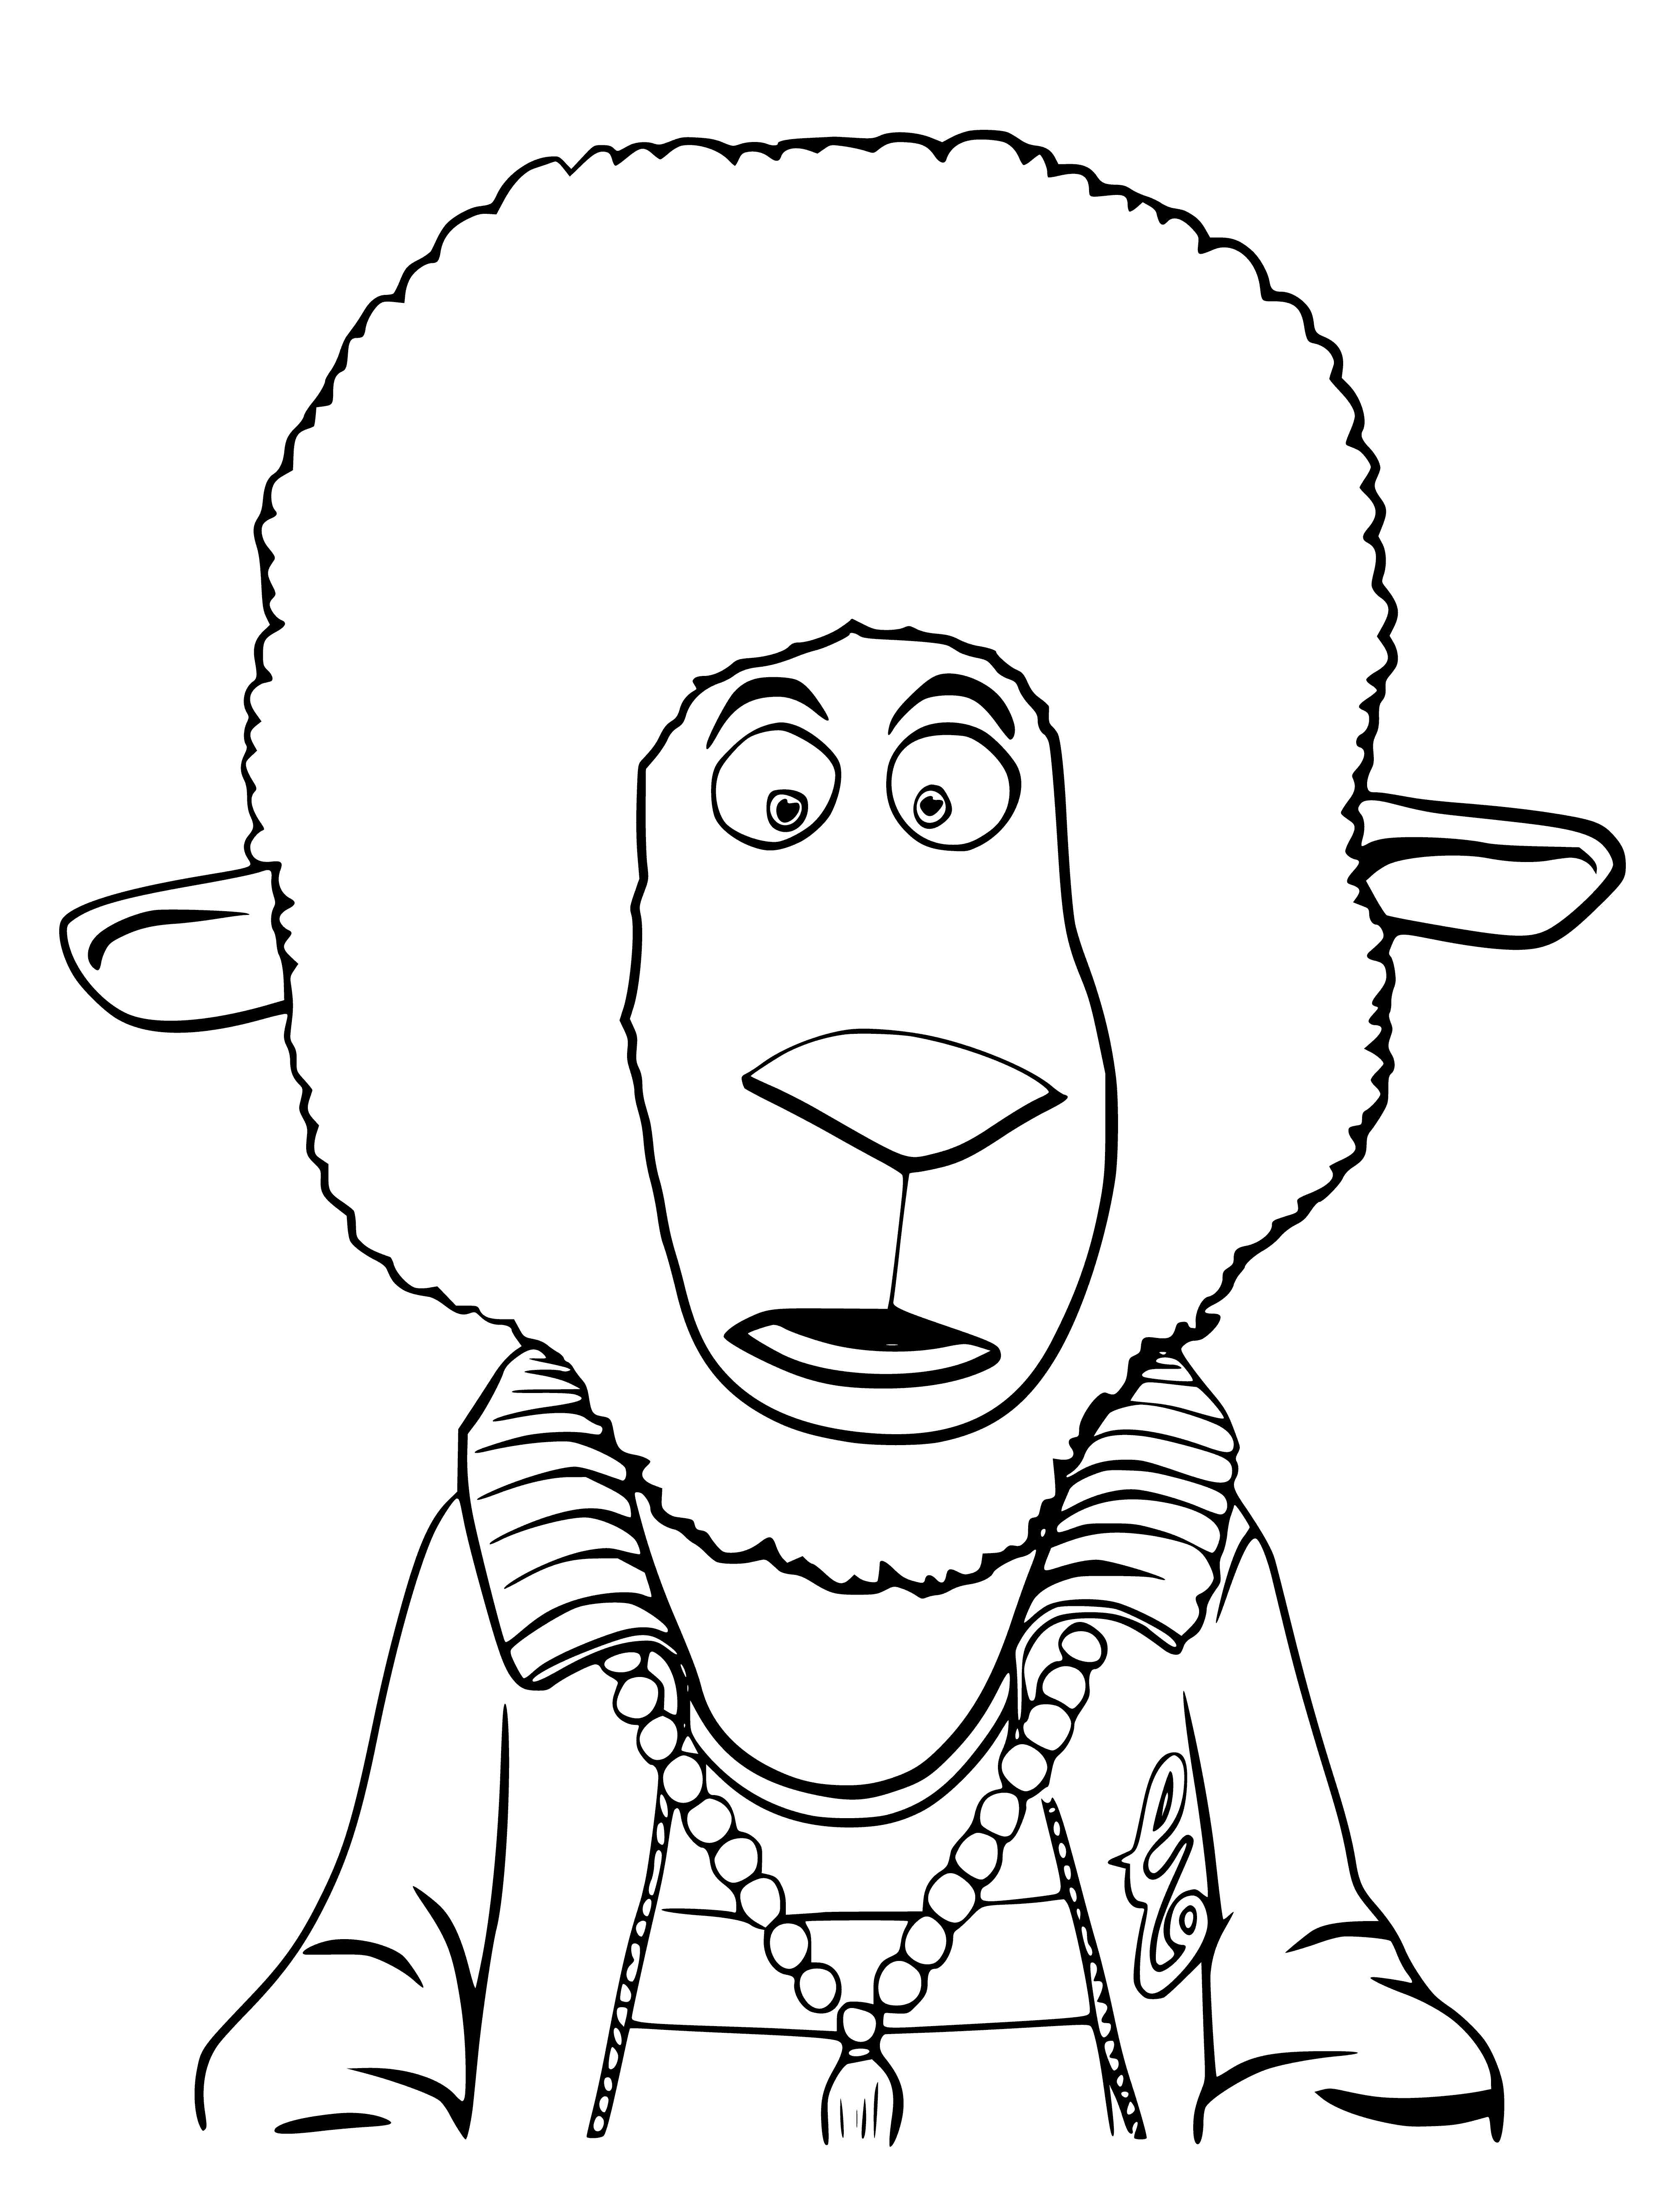 coloring page: Eddie is a singing sheep; white body, black face, short curly wool, neck, big eyes. He's standing in a sunny pasture, scarf around his neck, flowers & trees in the background.